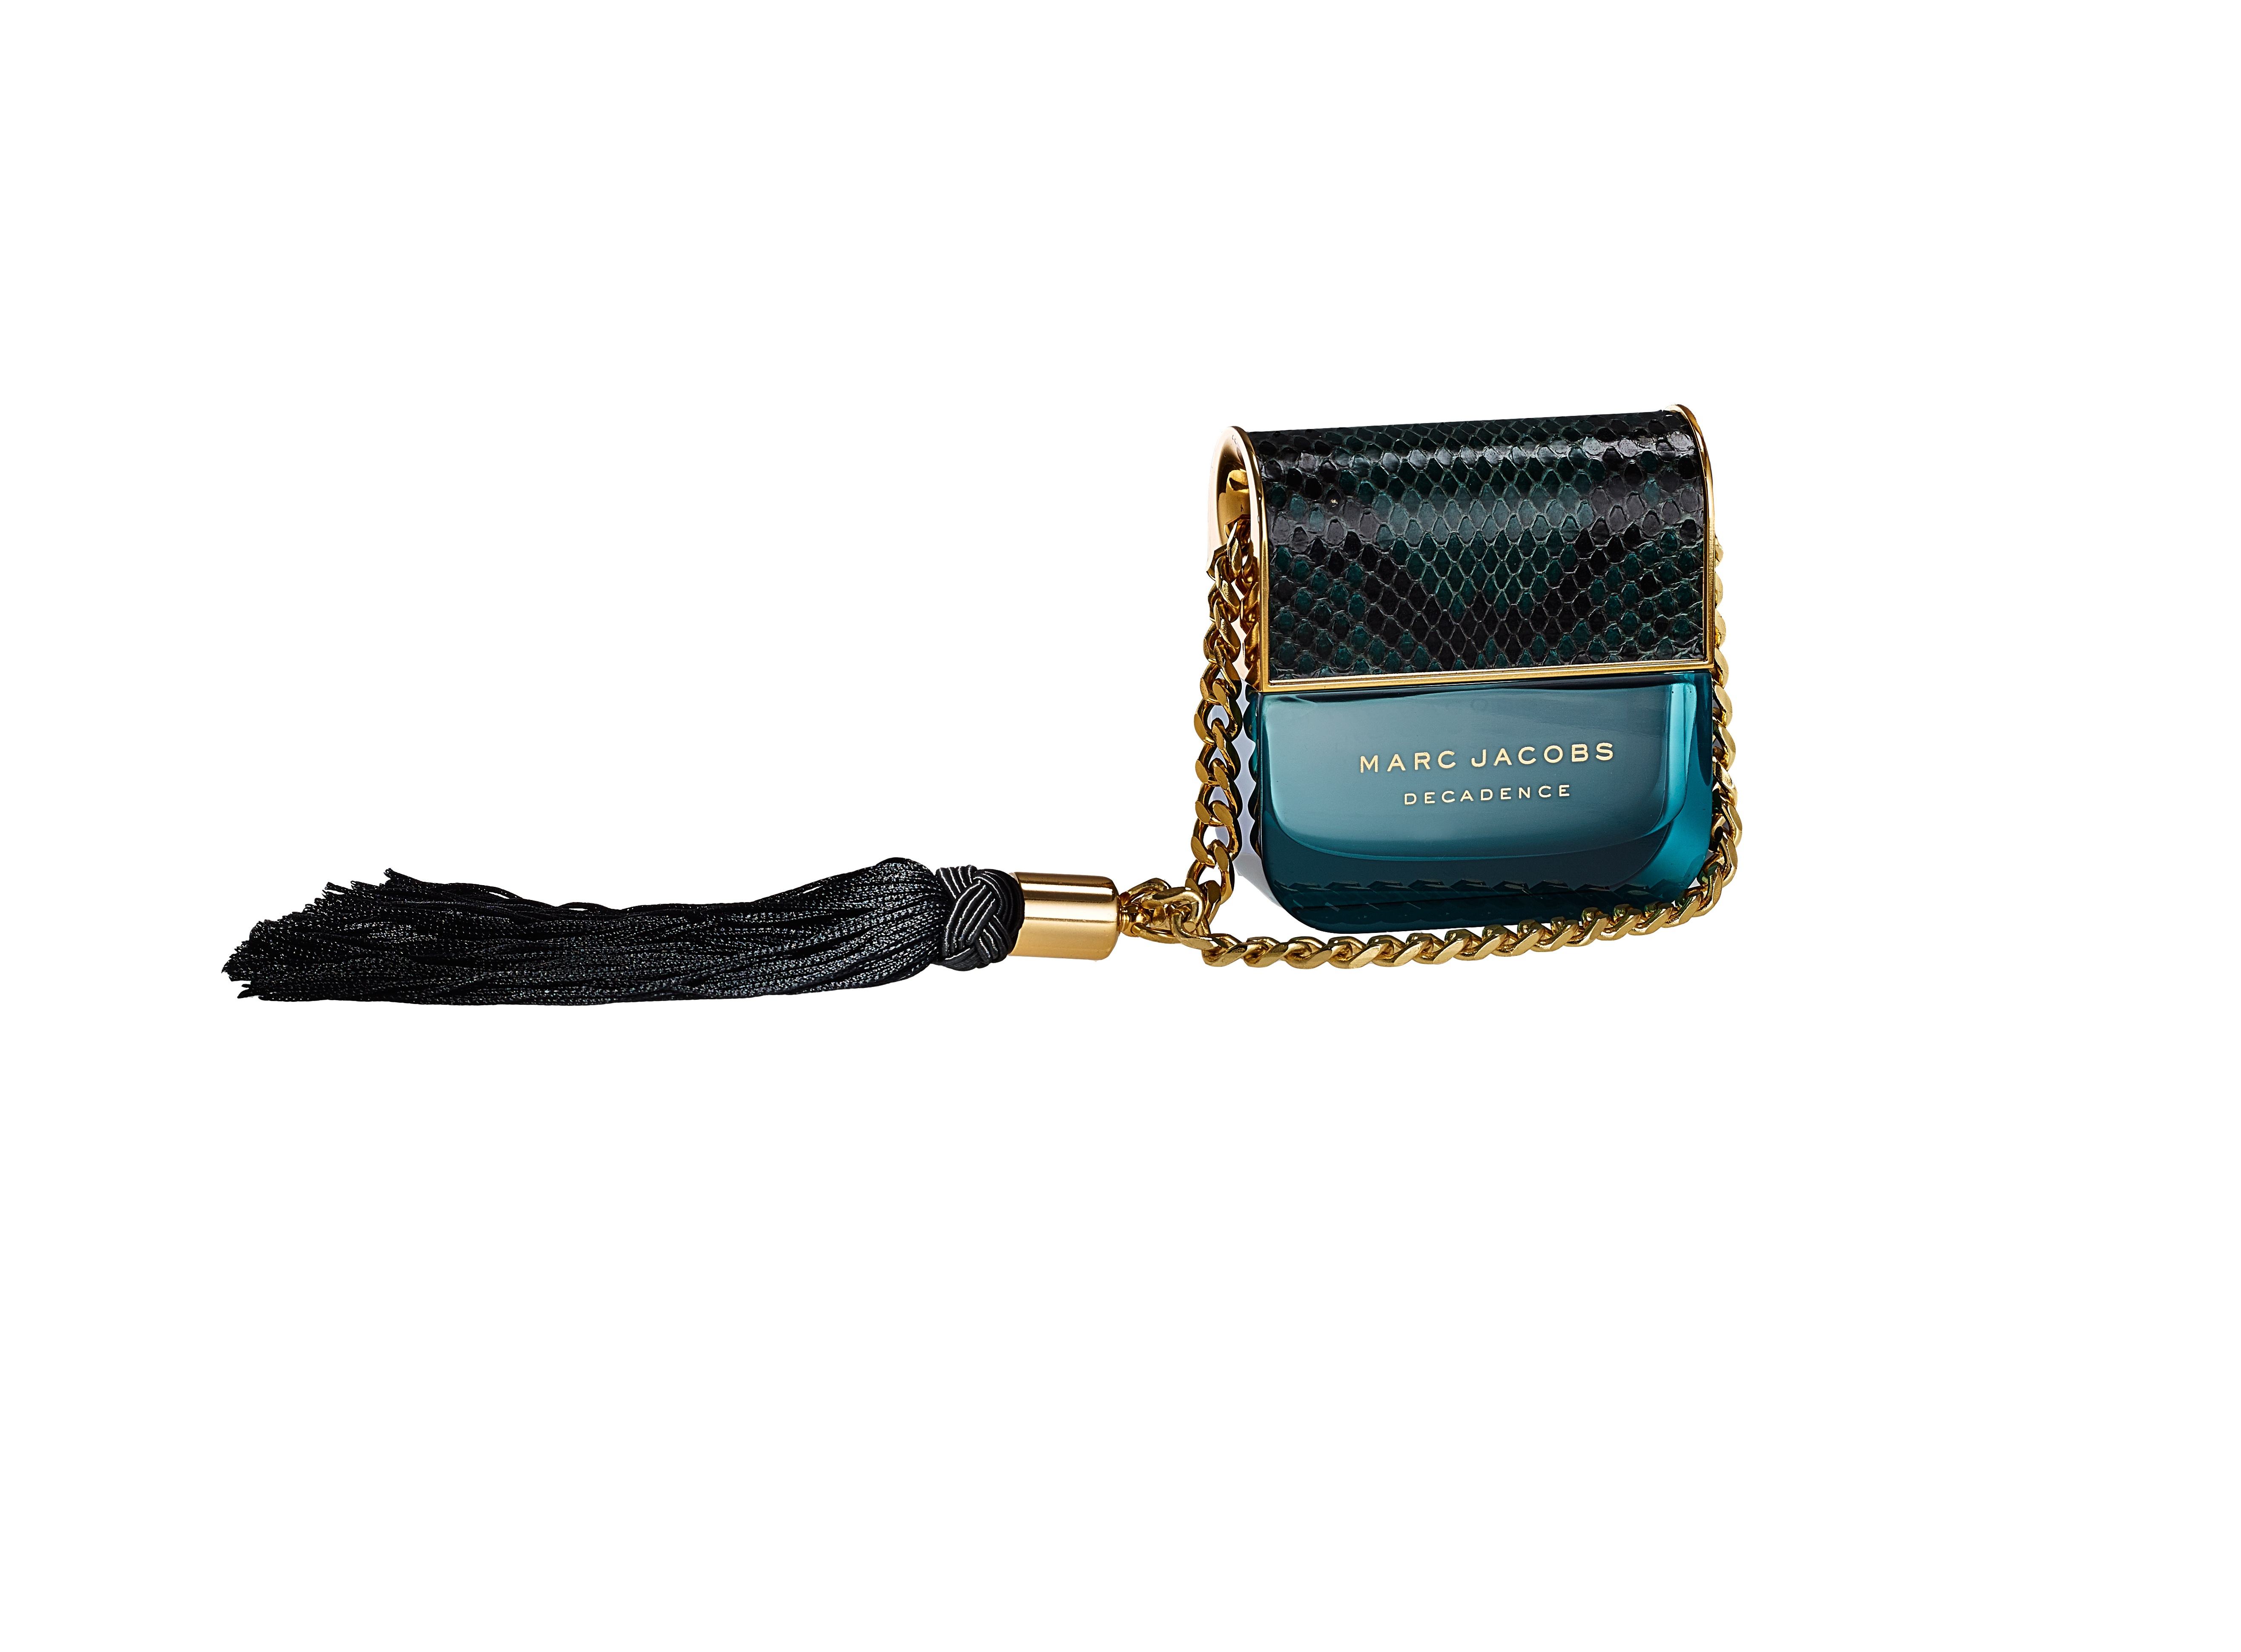 Marc jacobs decadence. Marc Jacobs бренд.